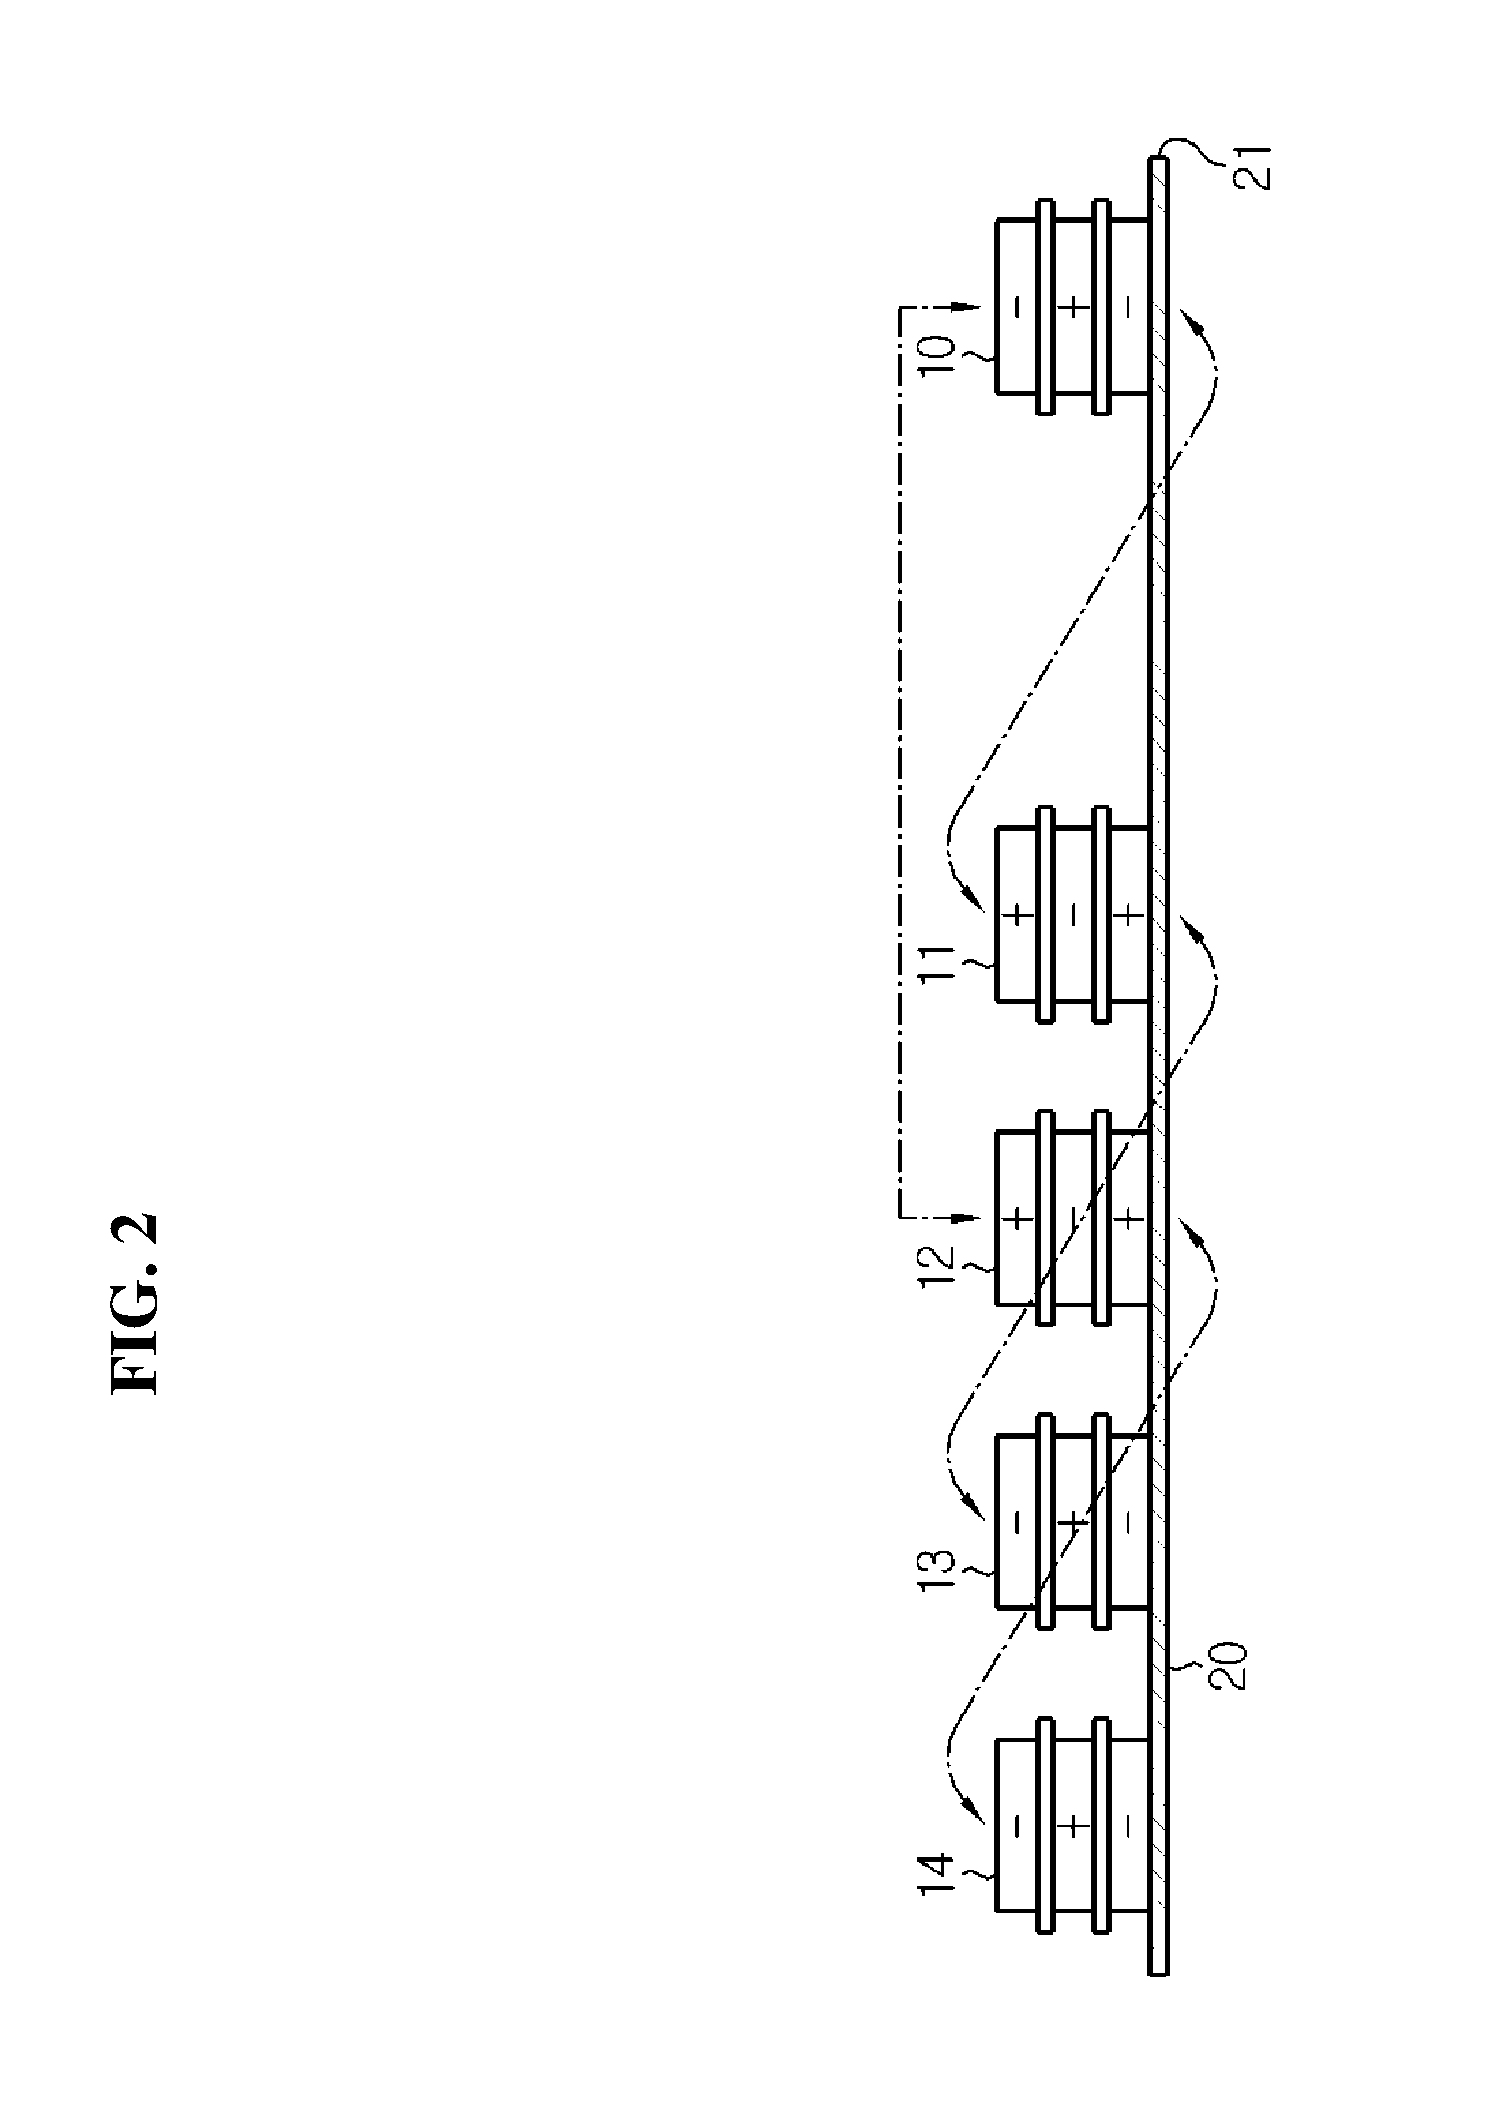 Stack-folding type electrode assembly and method of manufacturing the same